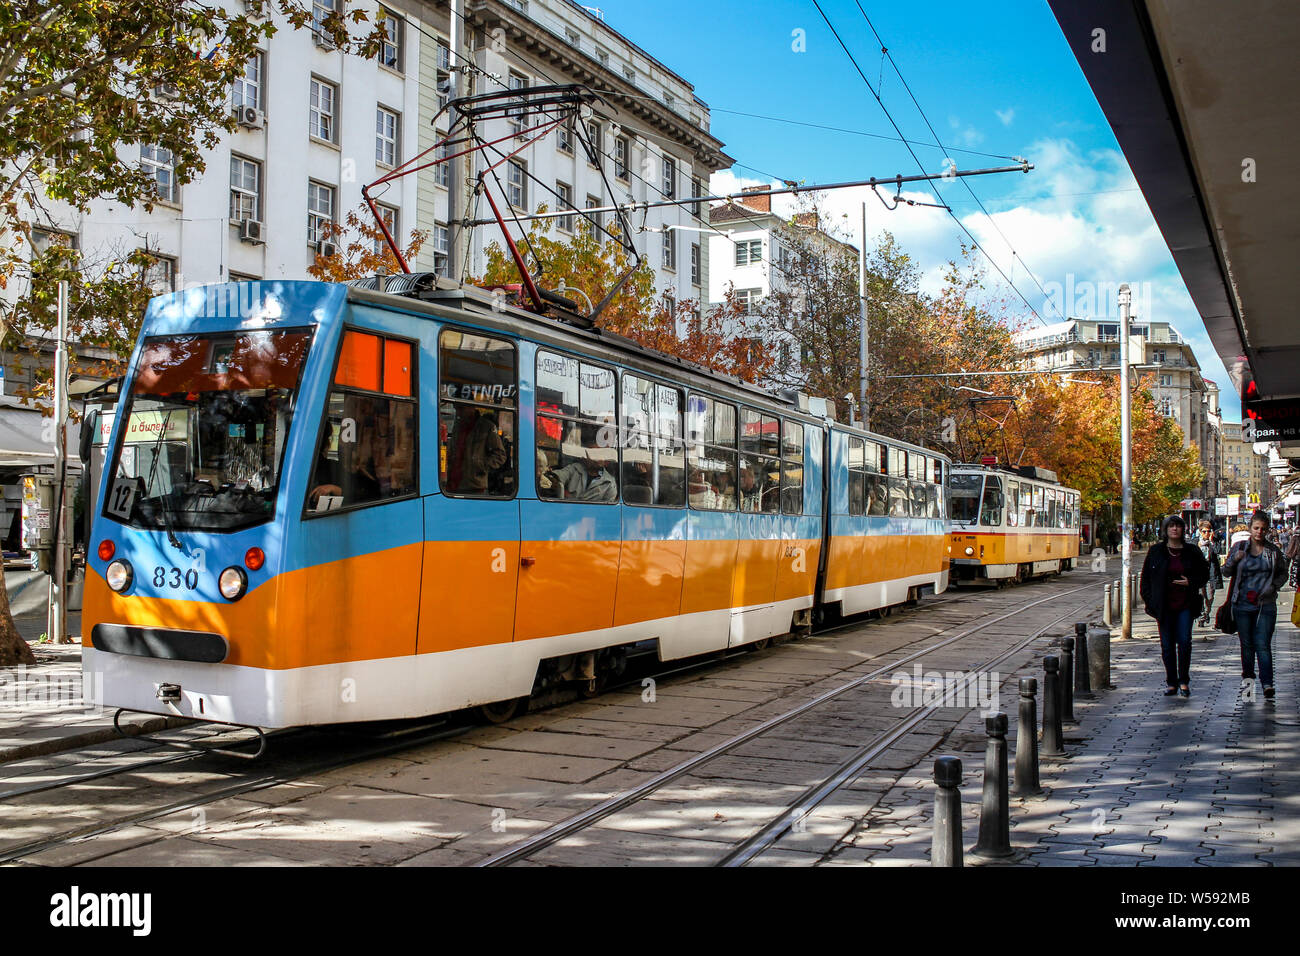 Sofia / Bulgaria - October 18 2013: A street in the city center of sofia and tram. Daily life in Sofia Stock Photo